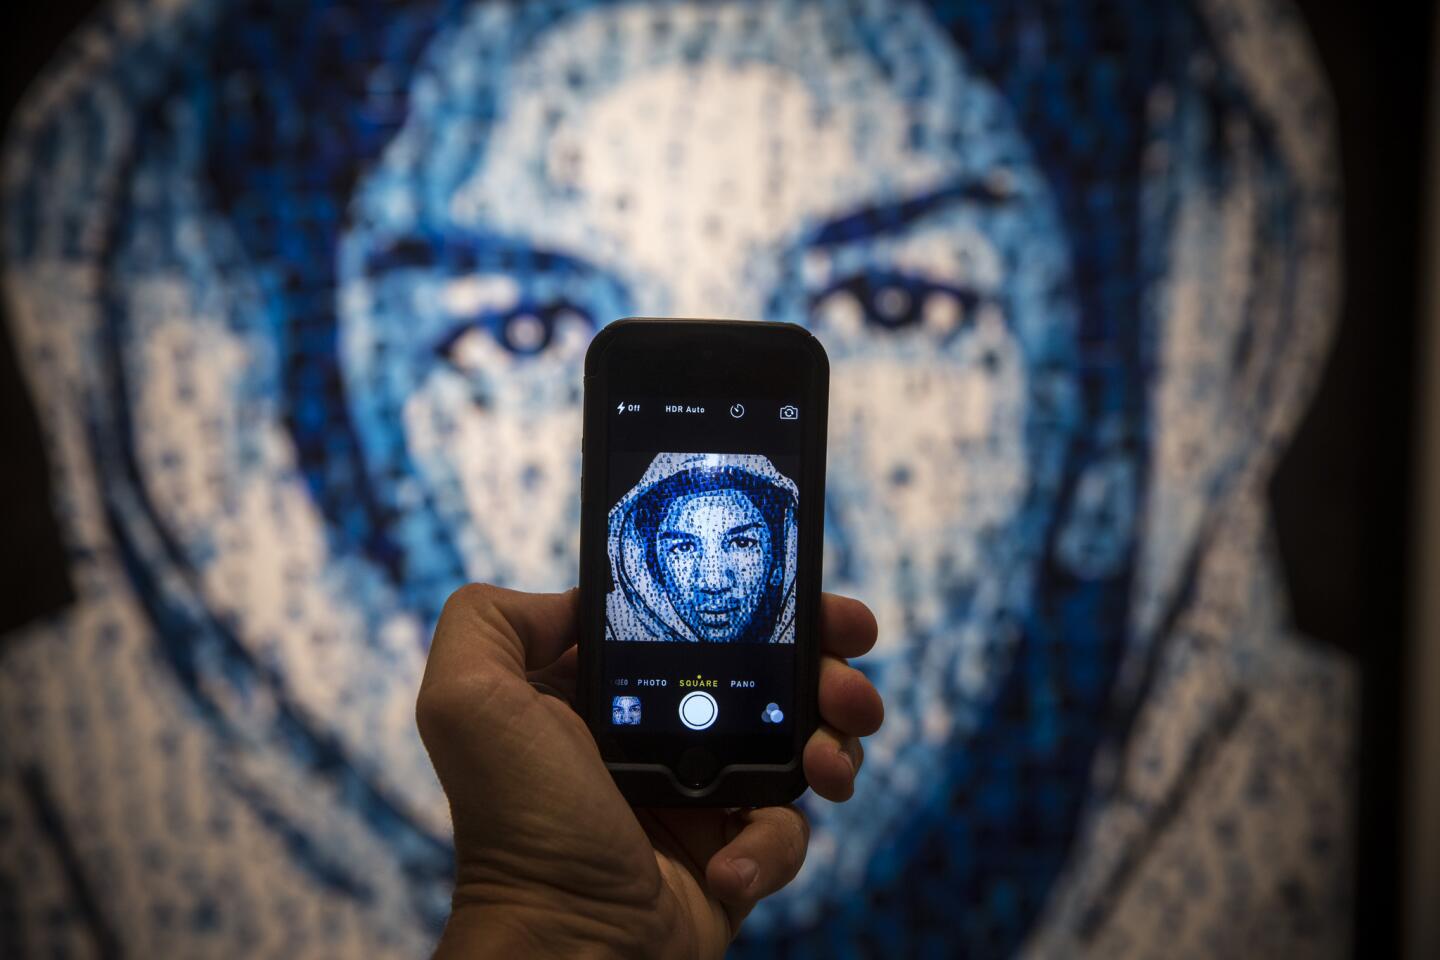 The face of Trayvon Martin, as rendered in "Trayvon Memorial," glows on a phone's screen. The artwork by Gerri Lawrence, collaborating with Raul Ocampo, is among more than 220 works by an estimated 150 artists presented in "Manifest Justice," a pop-up exhibition in Los Angeles.